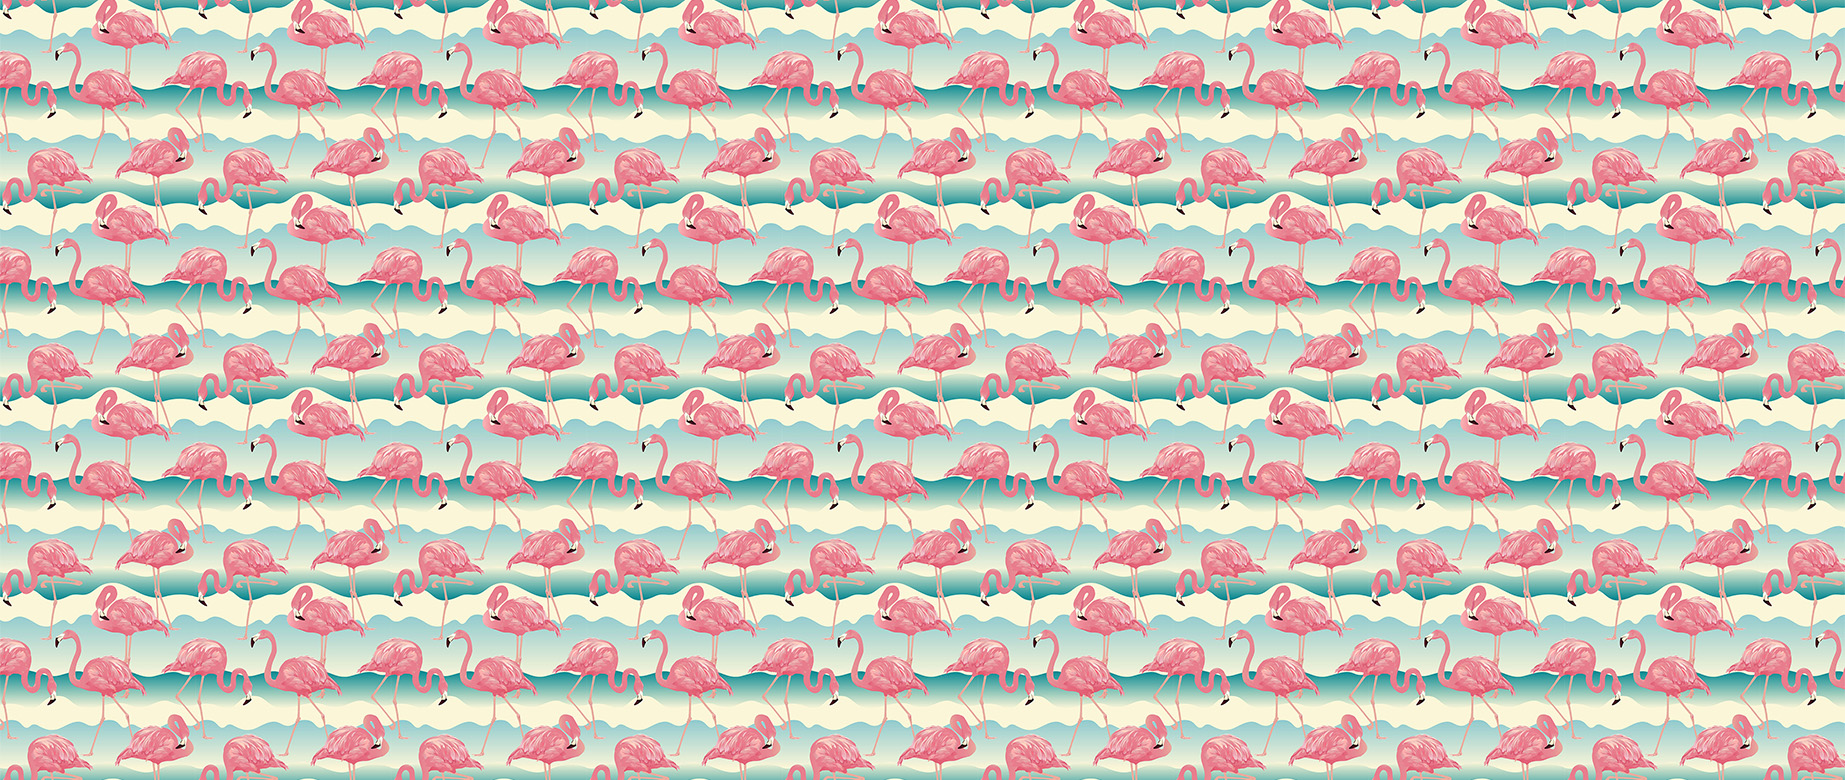 pink-flamingo-in-water-pattern-wallpapers-full-wide-view